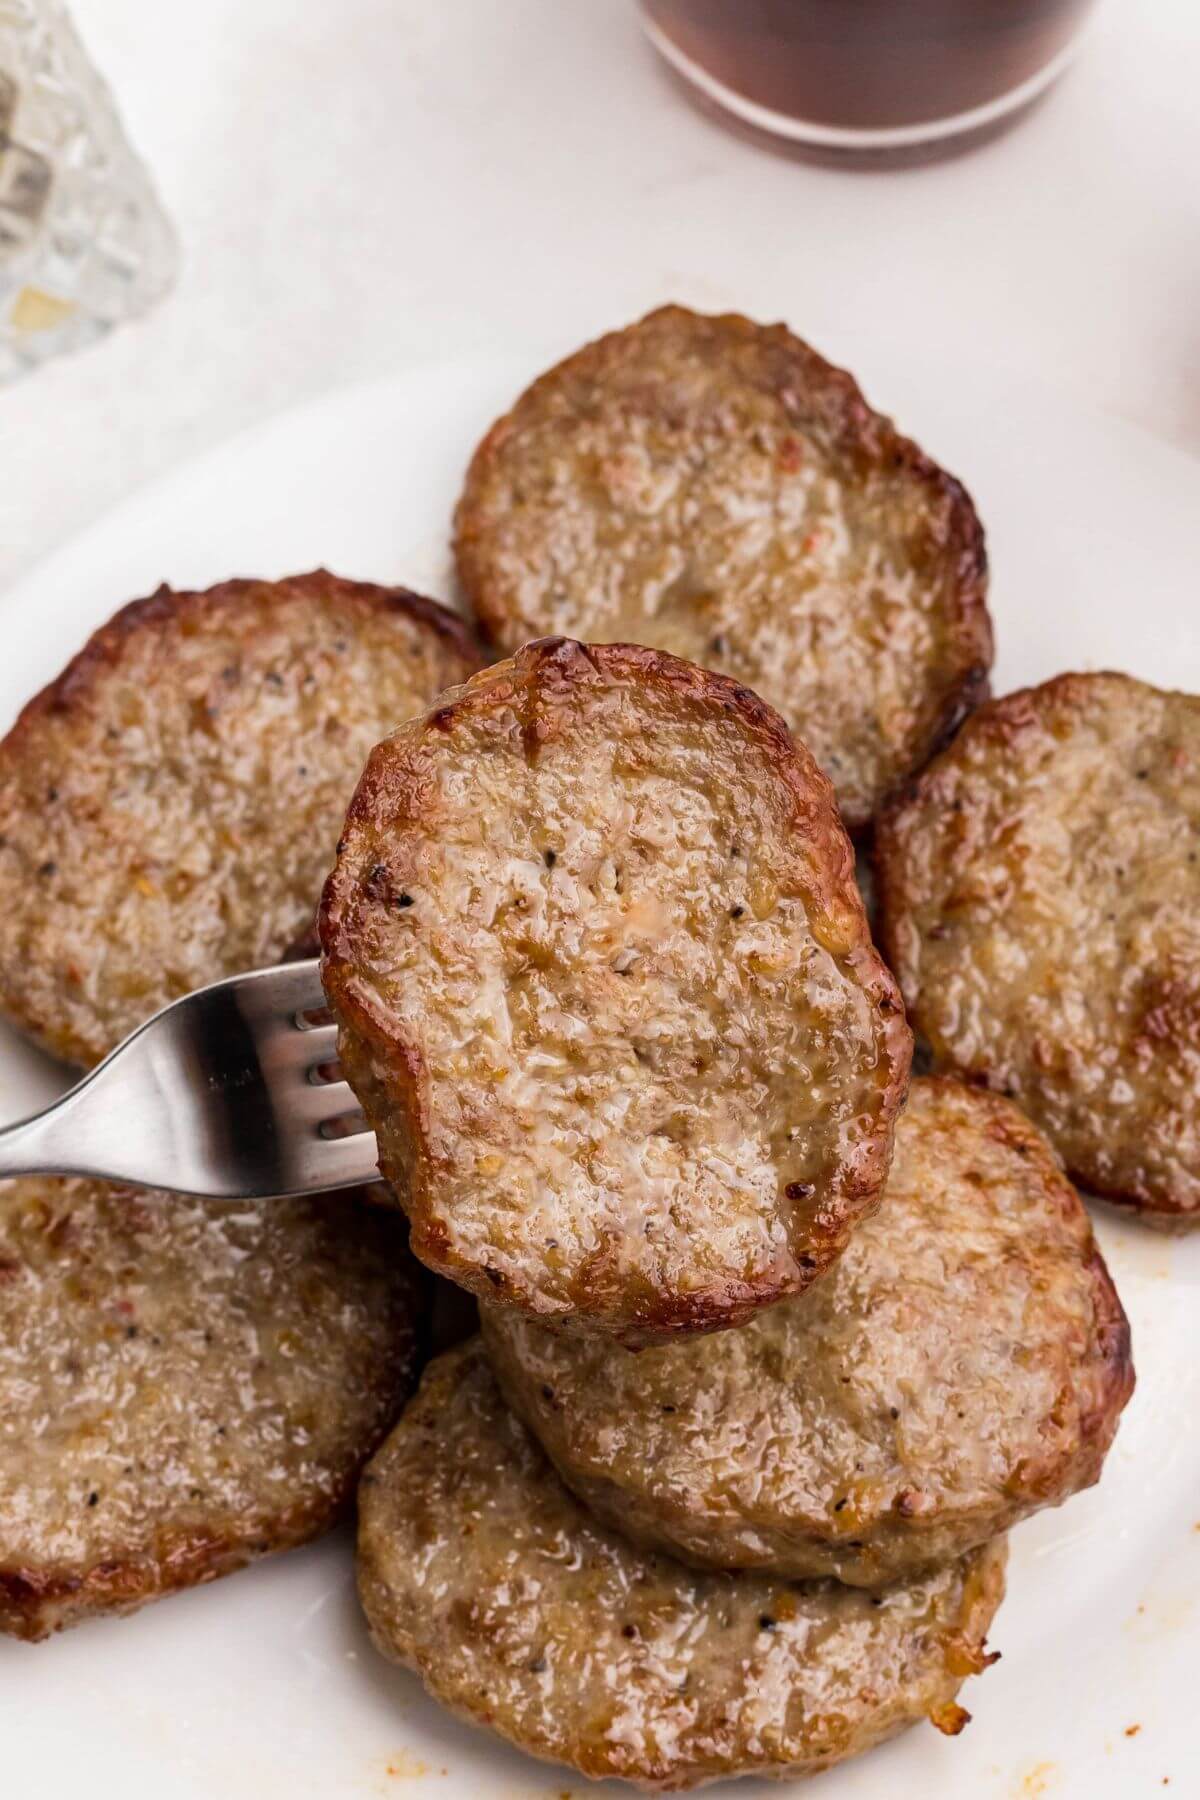 Golden brown and juicy sausage patties stacked on a plate with one being taken with a fork. 